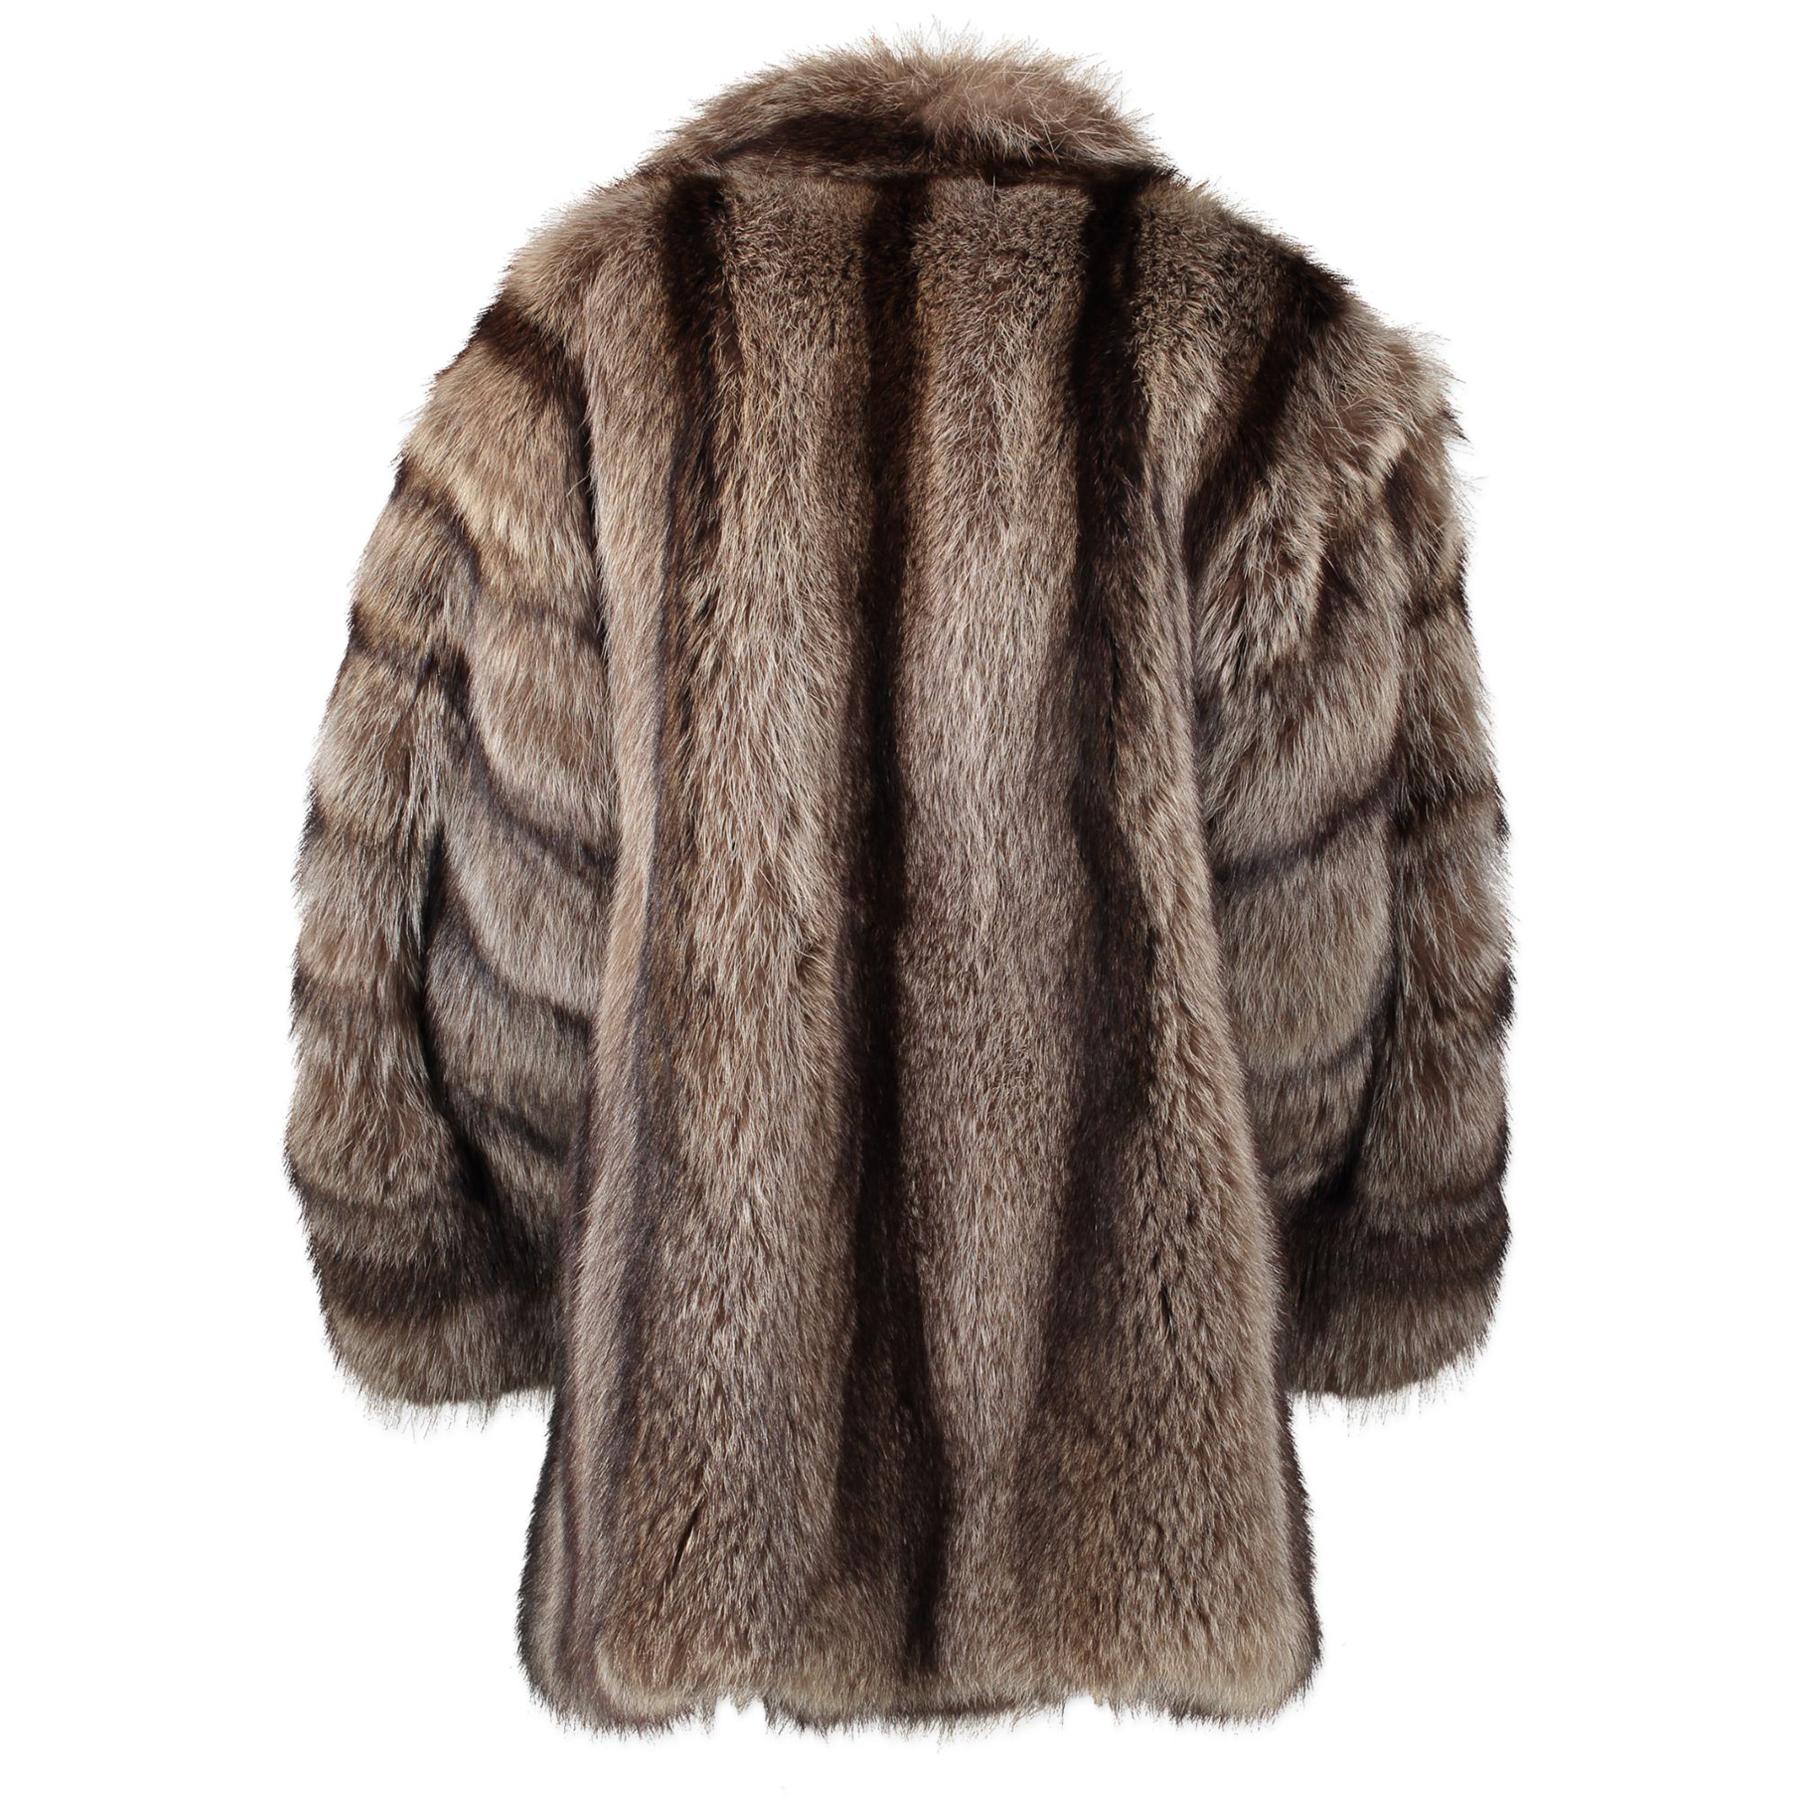 Yves Saint Laurent is known for their haute couture and influencial designs.
This vintage raccoon fur jacket features a stand up collar and long sleeves. 
The jacket combines a vintage touch with the right amount of coolness.

